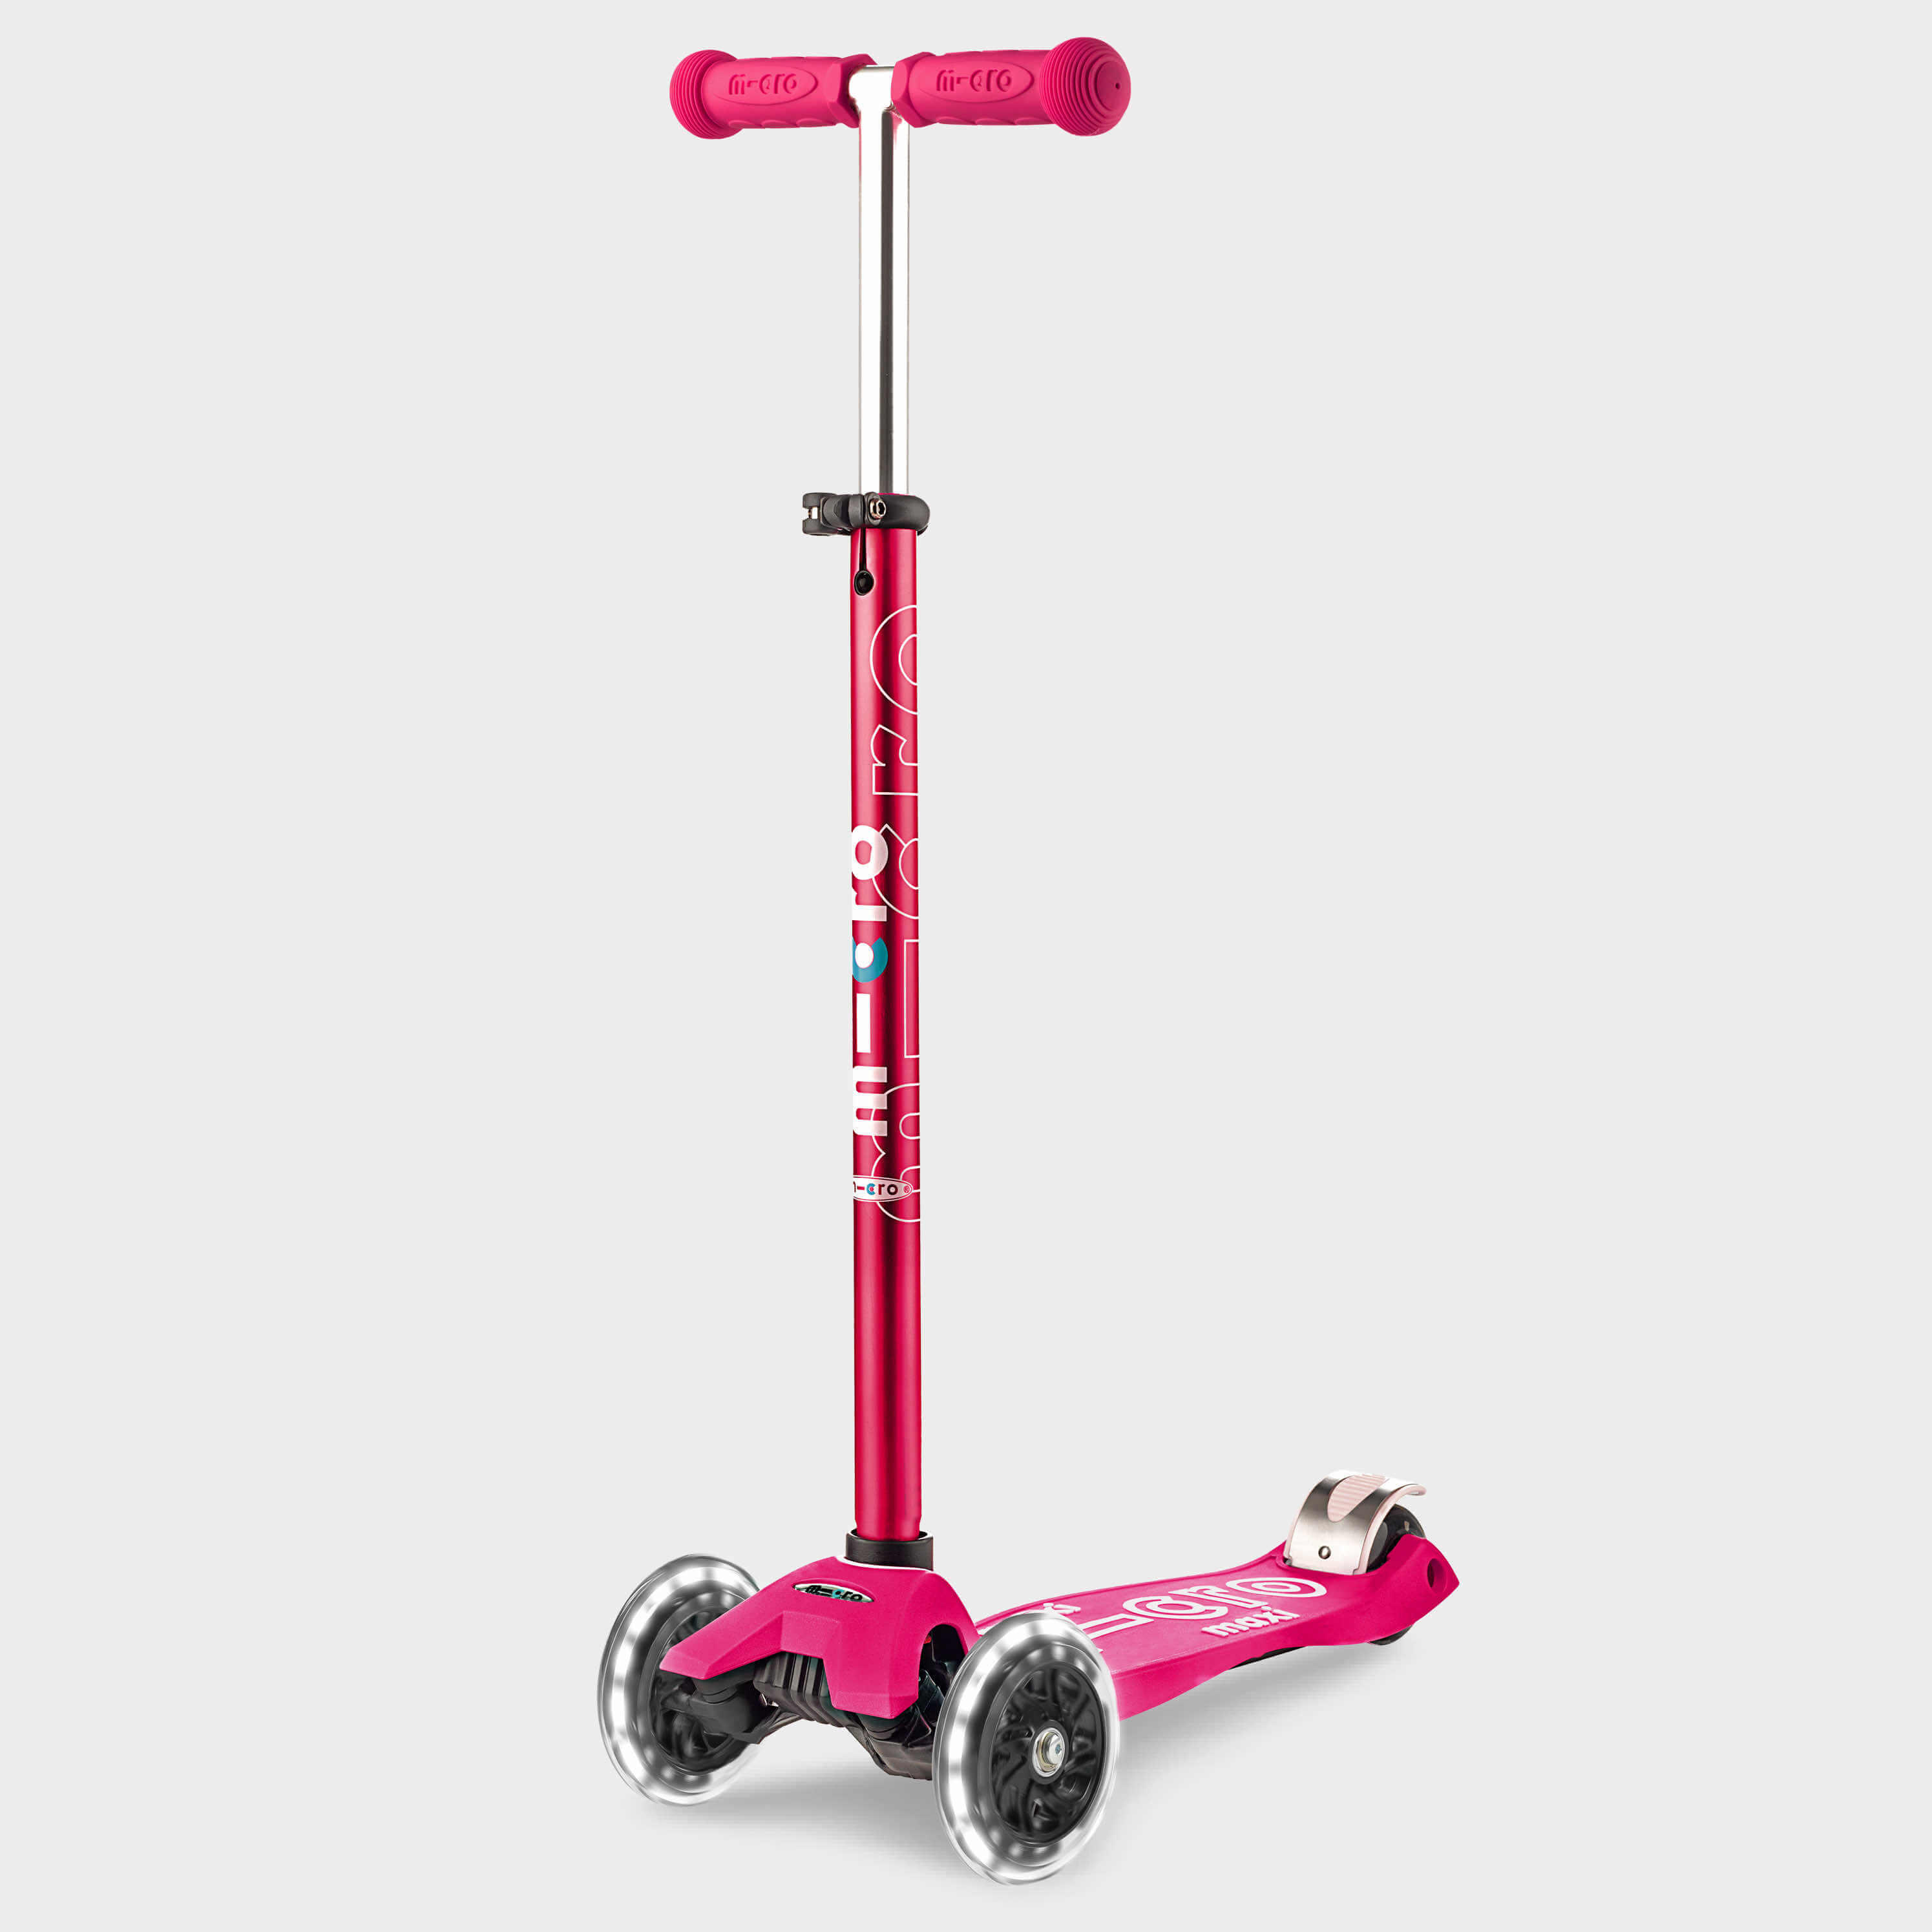 Maxi Scooter - Light up Wheels: Pink 1/7